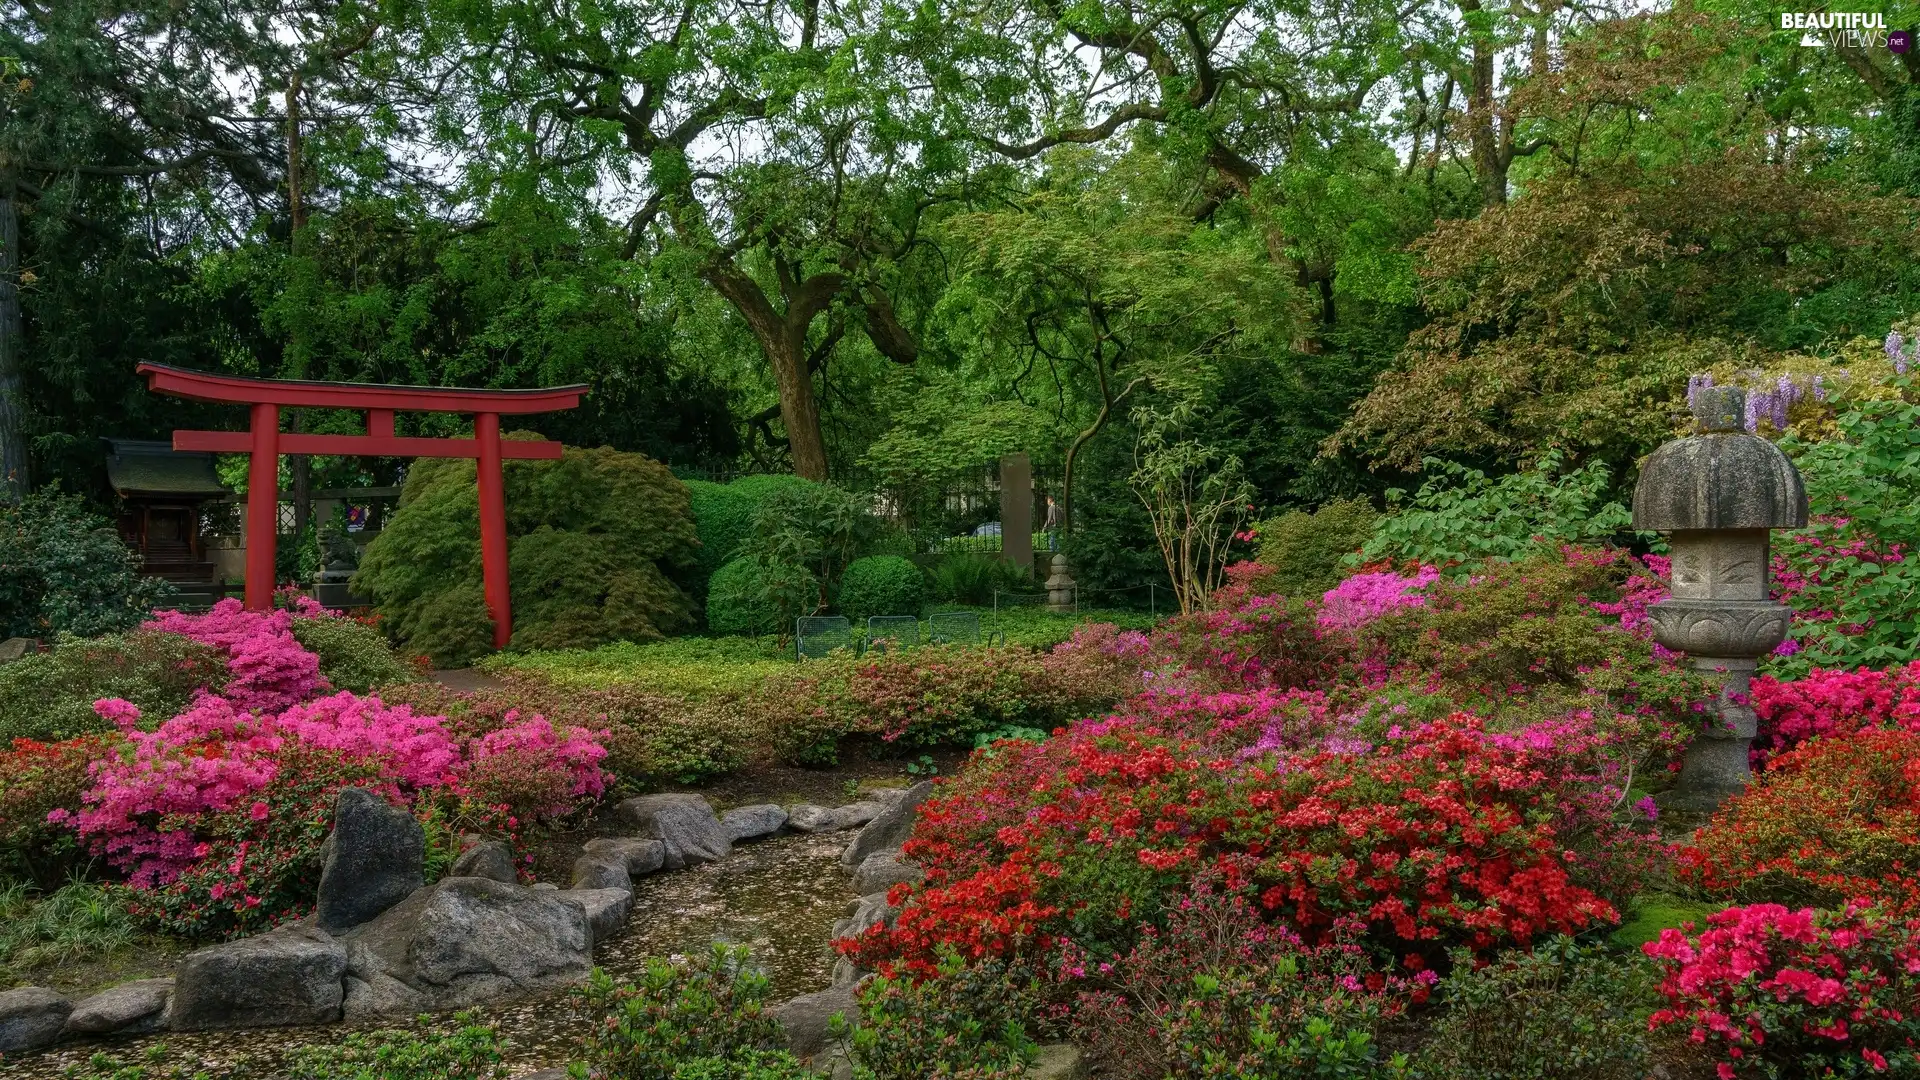 stream, Rhododendron, trees, viewes, Japanese Garden